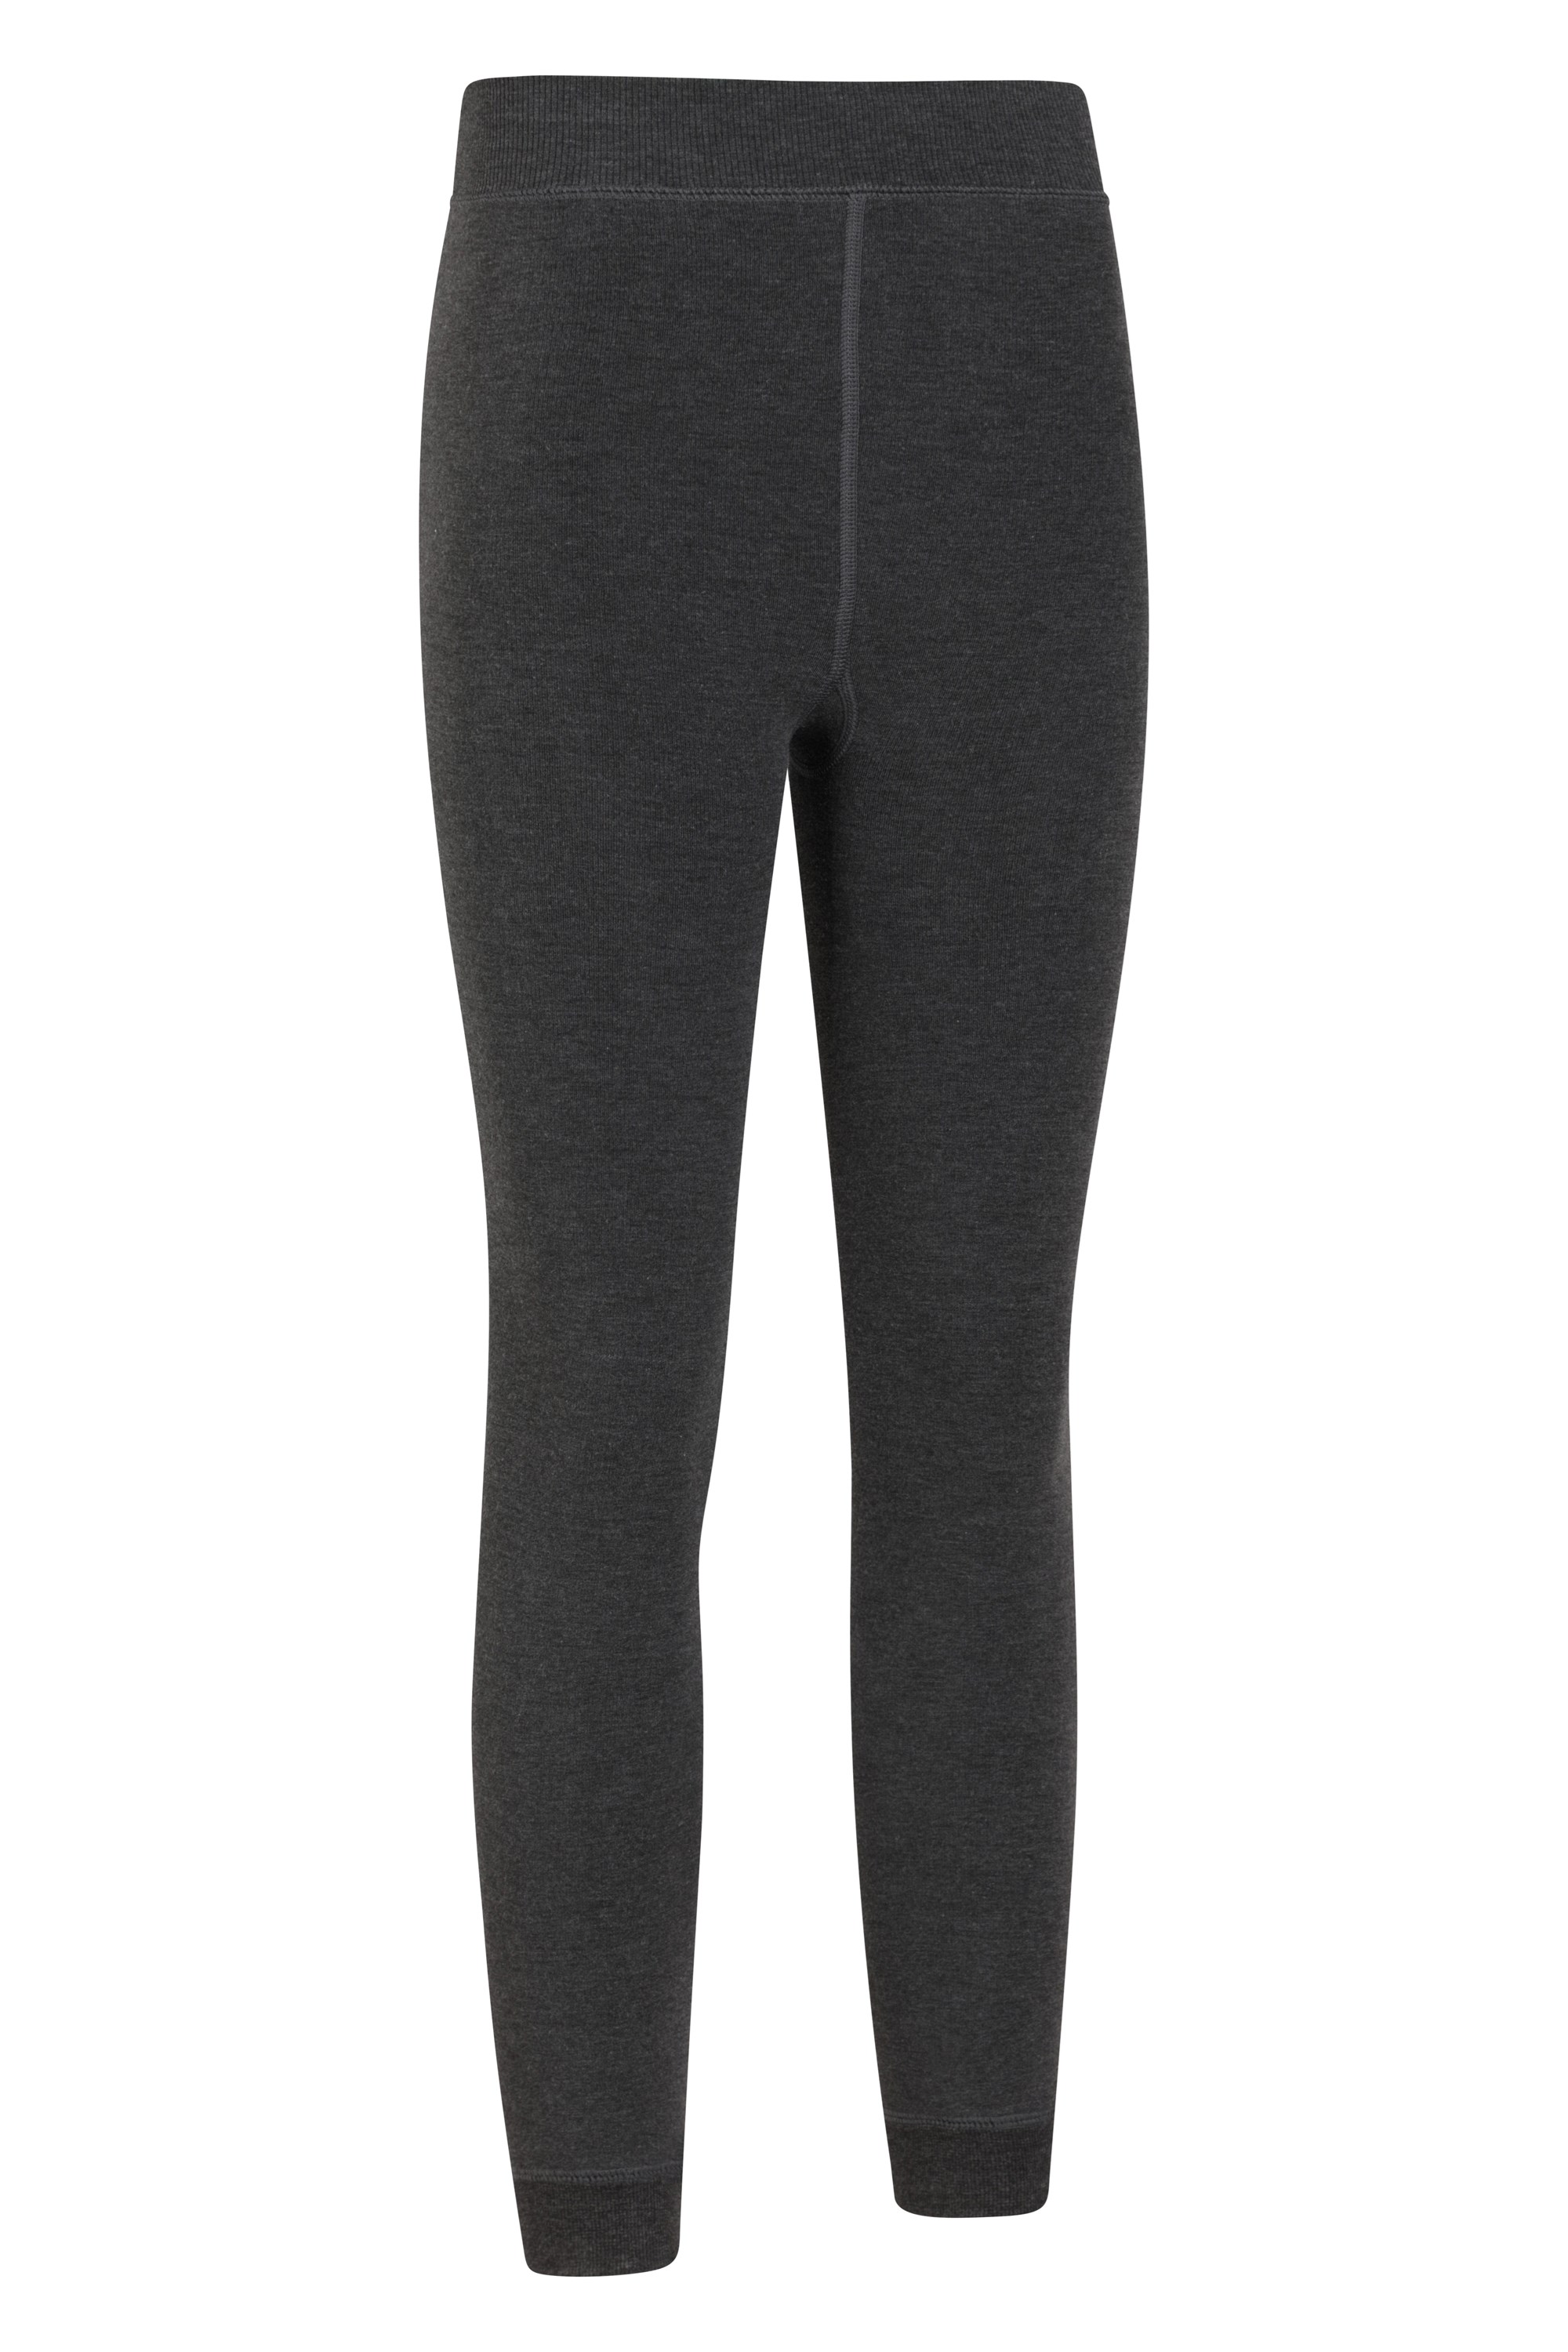 Fleece leggings for girls-Shop for products with free shipping